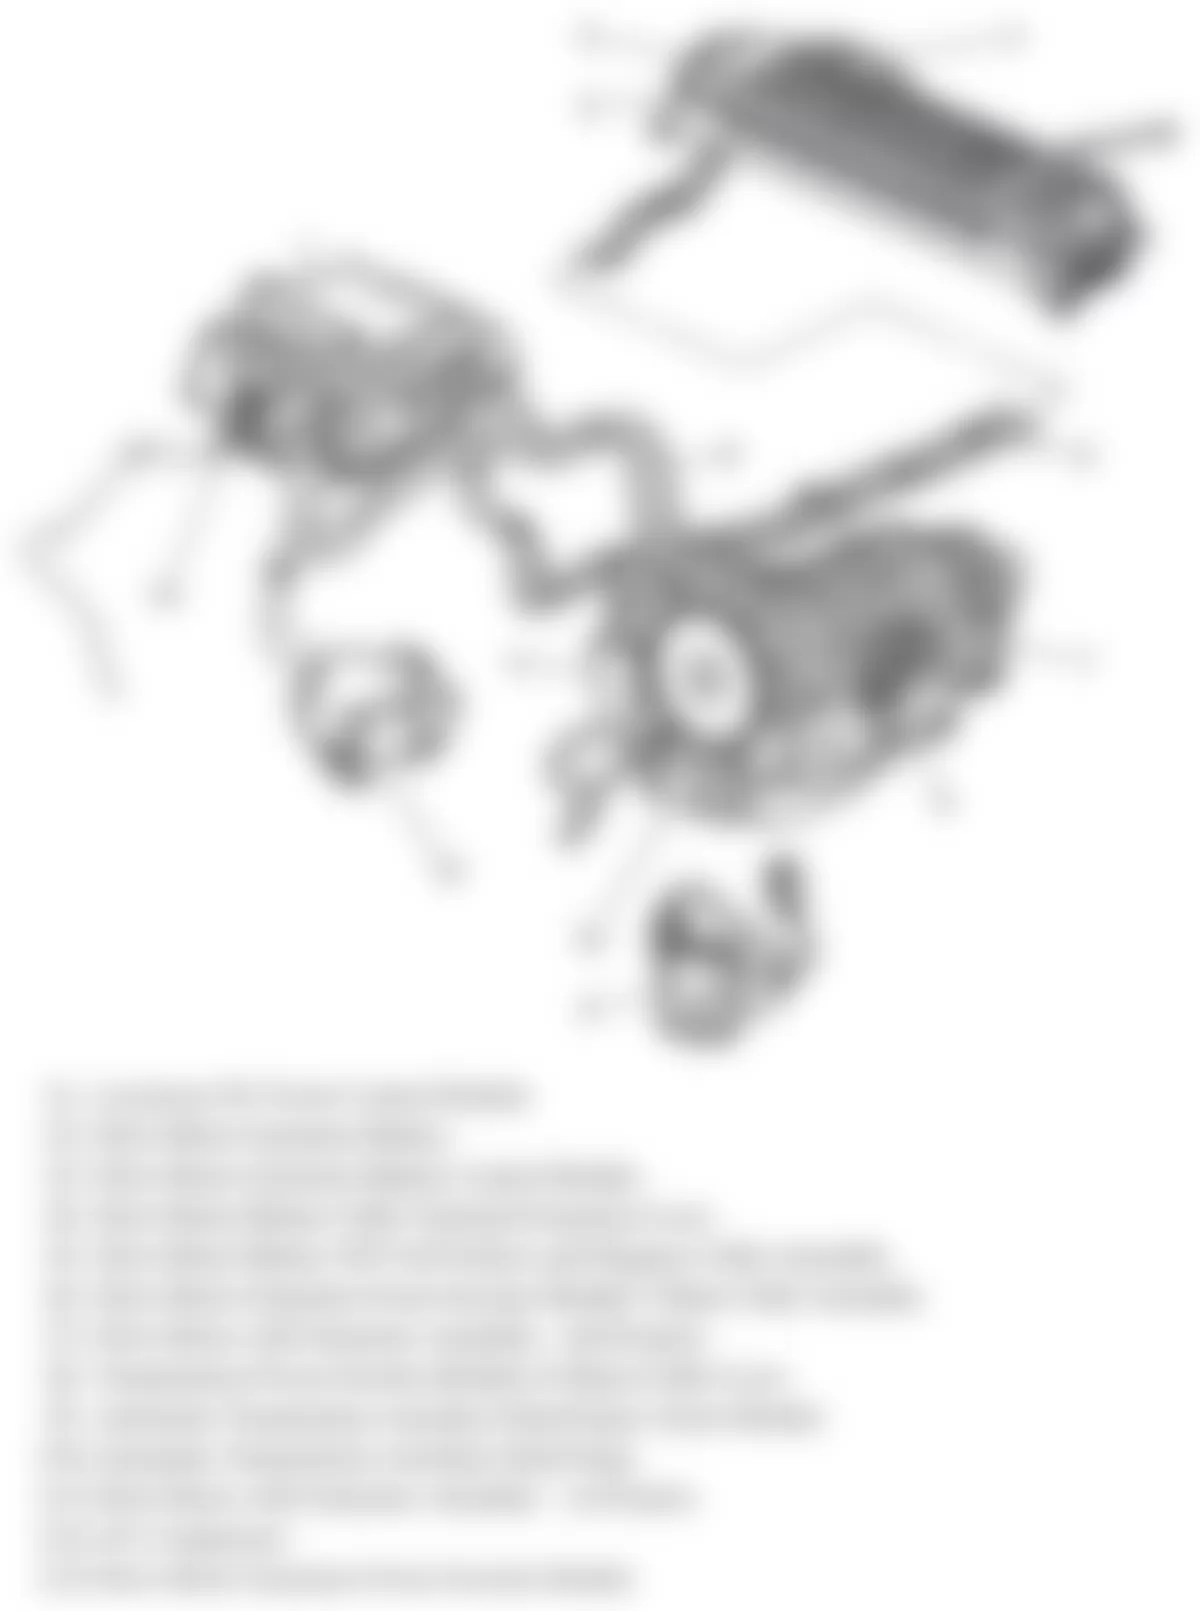 Chevrolet Silverado 1500 2009 - Component Locations -  Overview Of Hybrid Components